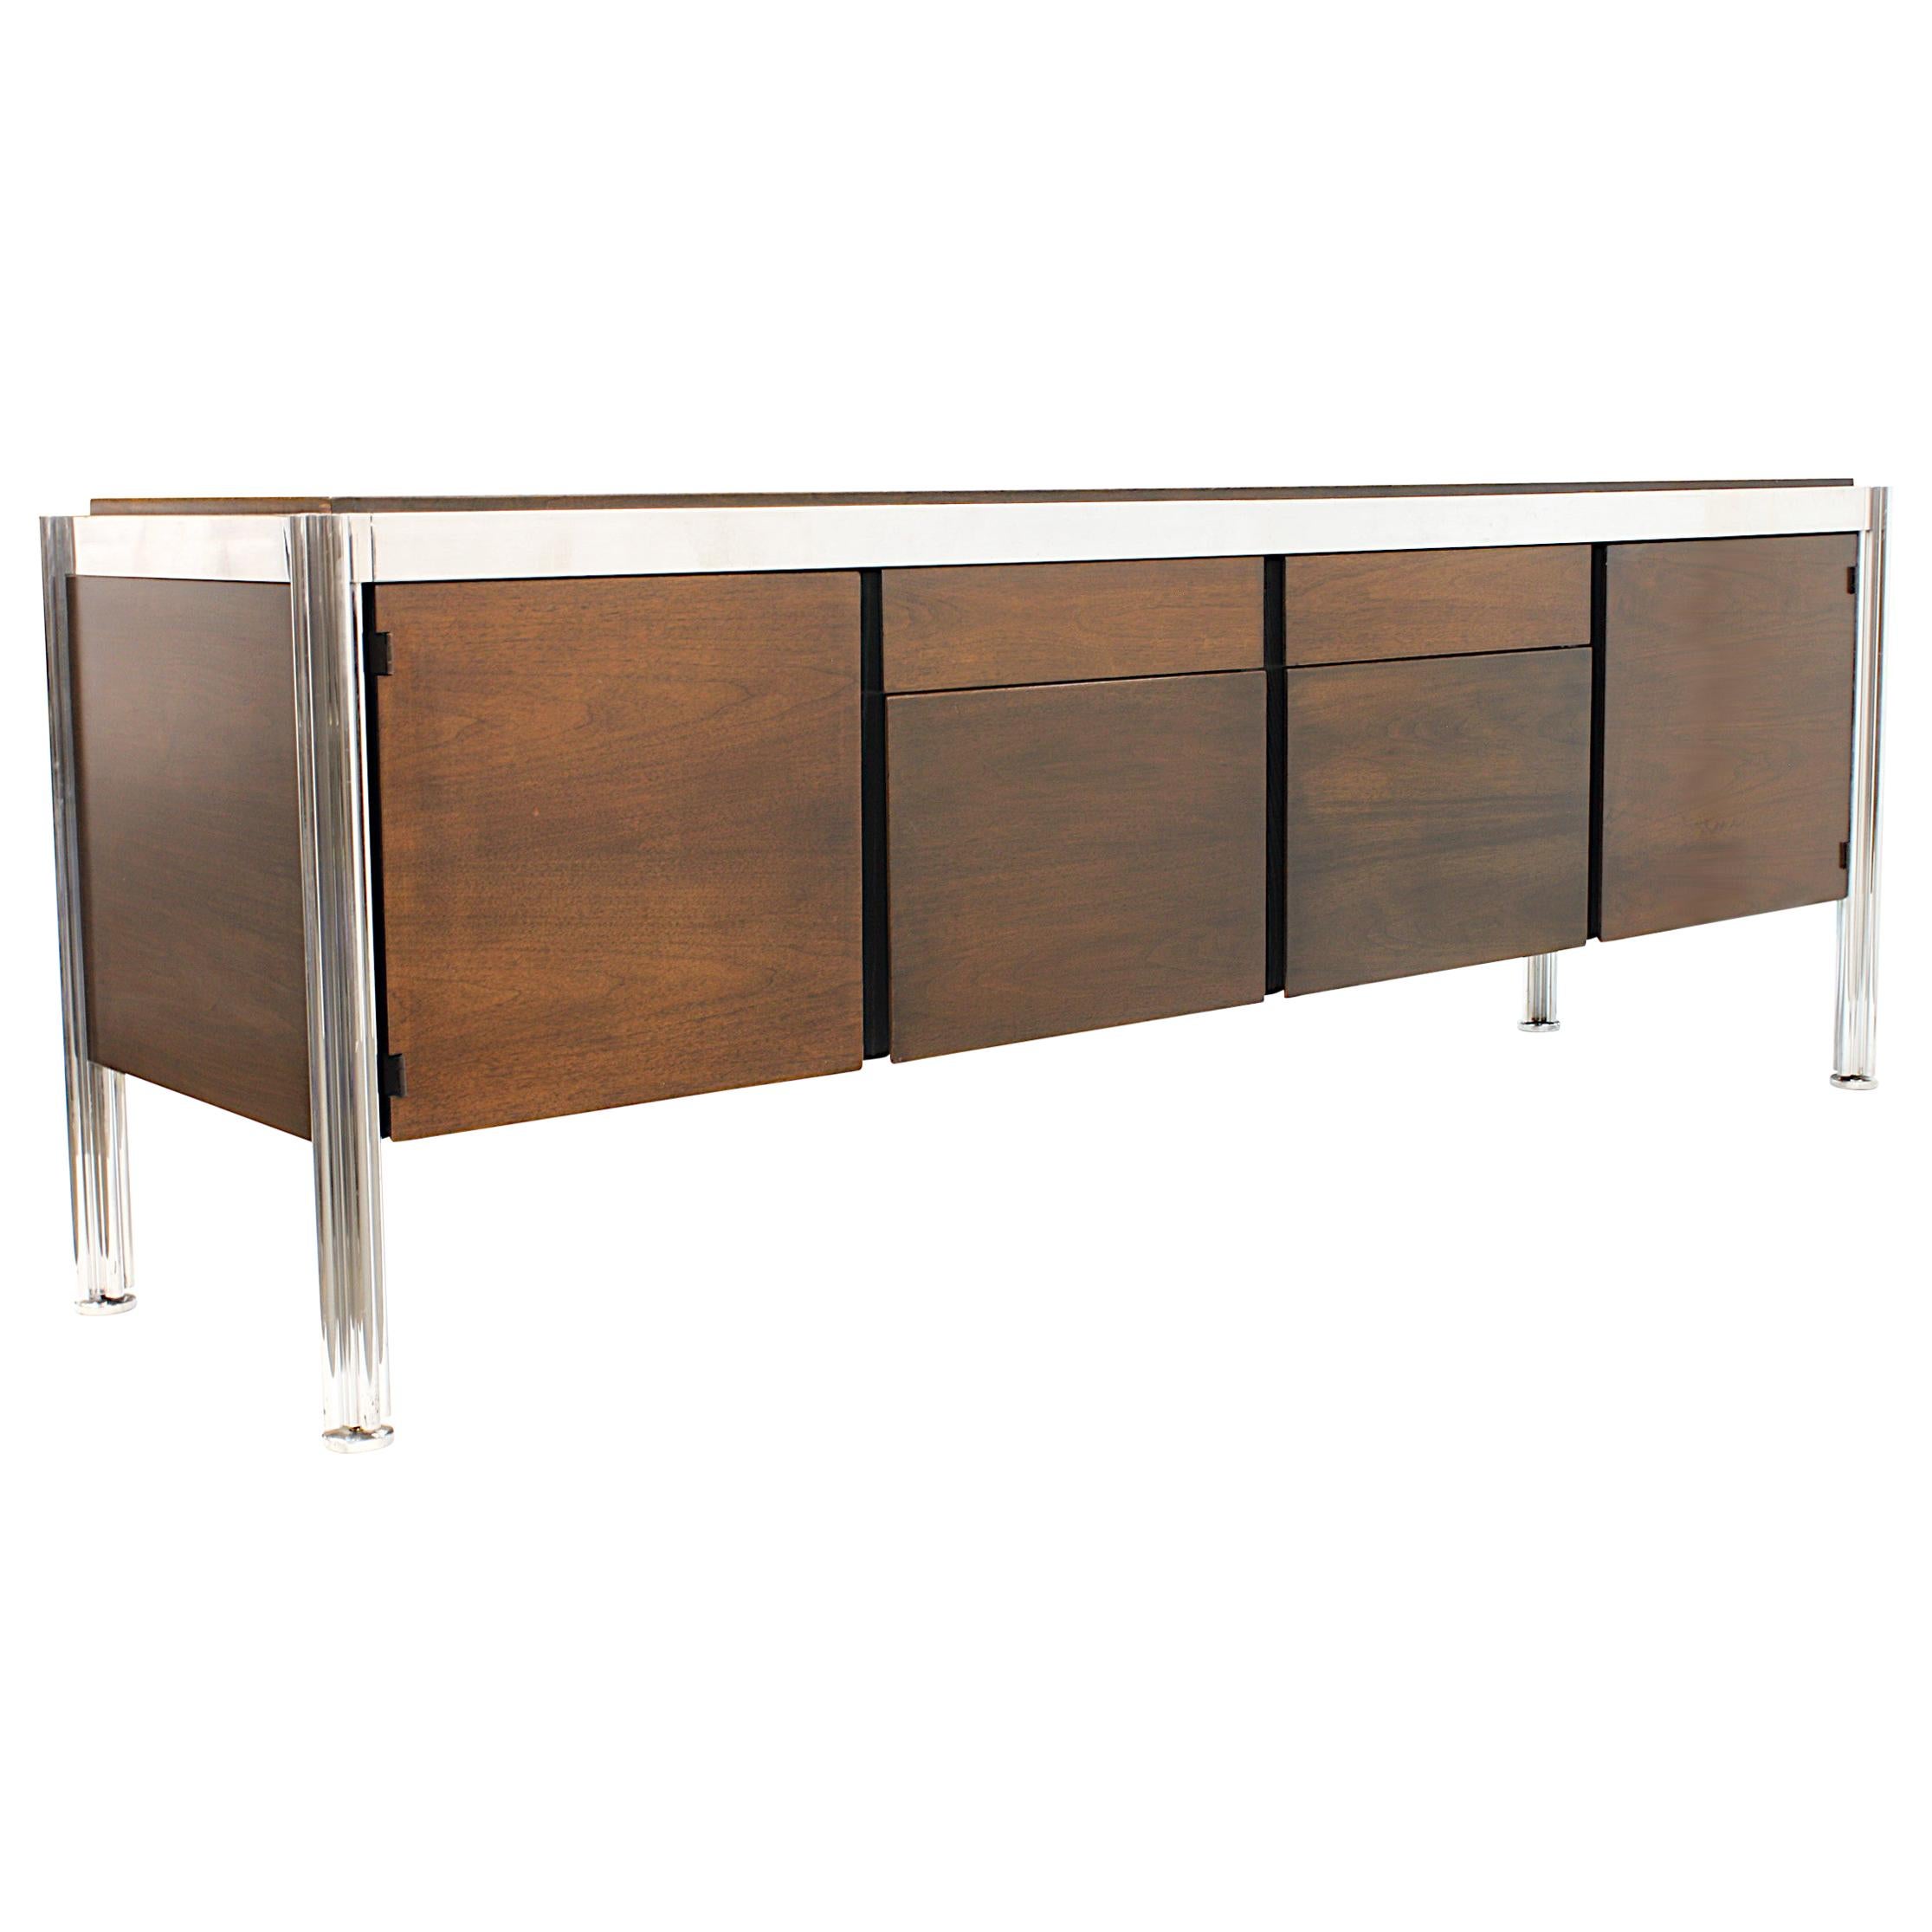 1970s Mid-Century Modern Walnut and Aluminum Credenza by George Ciancimino